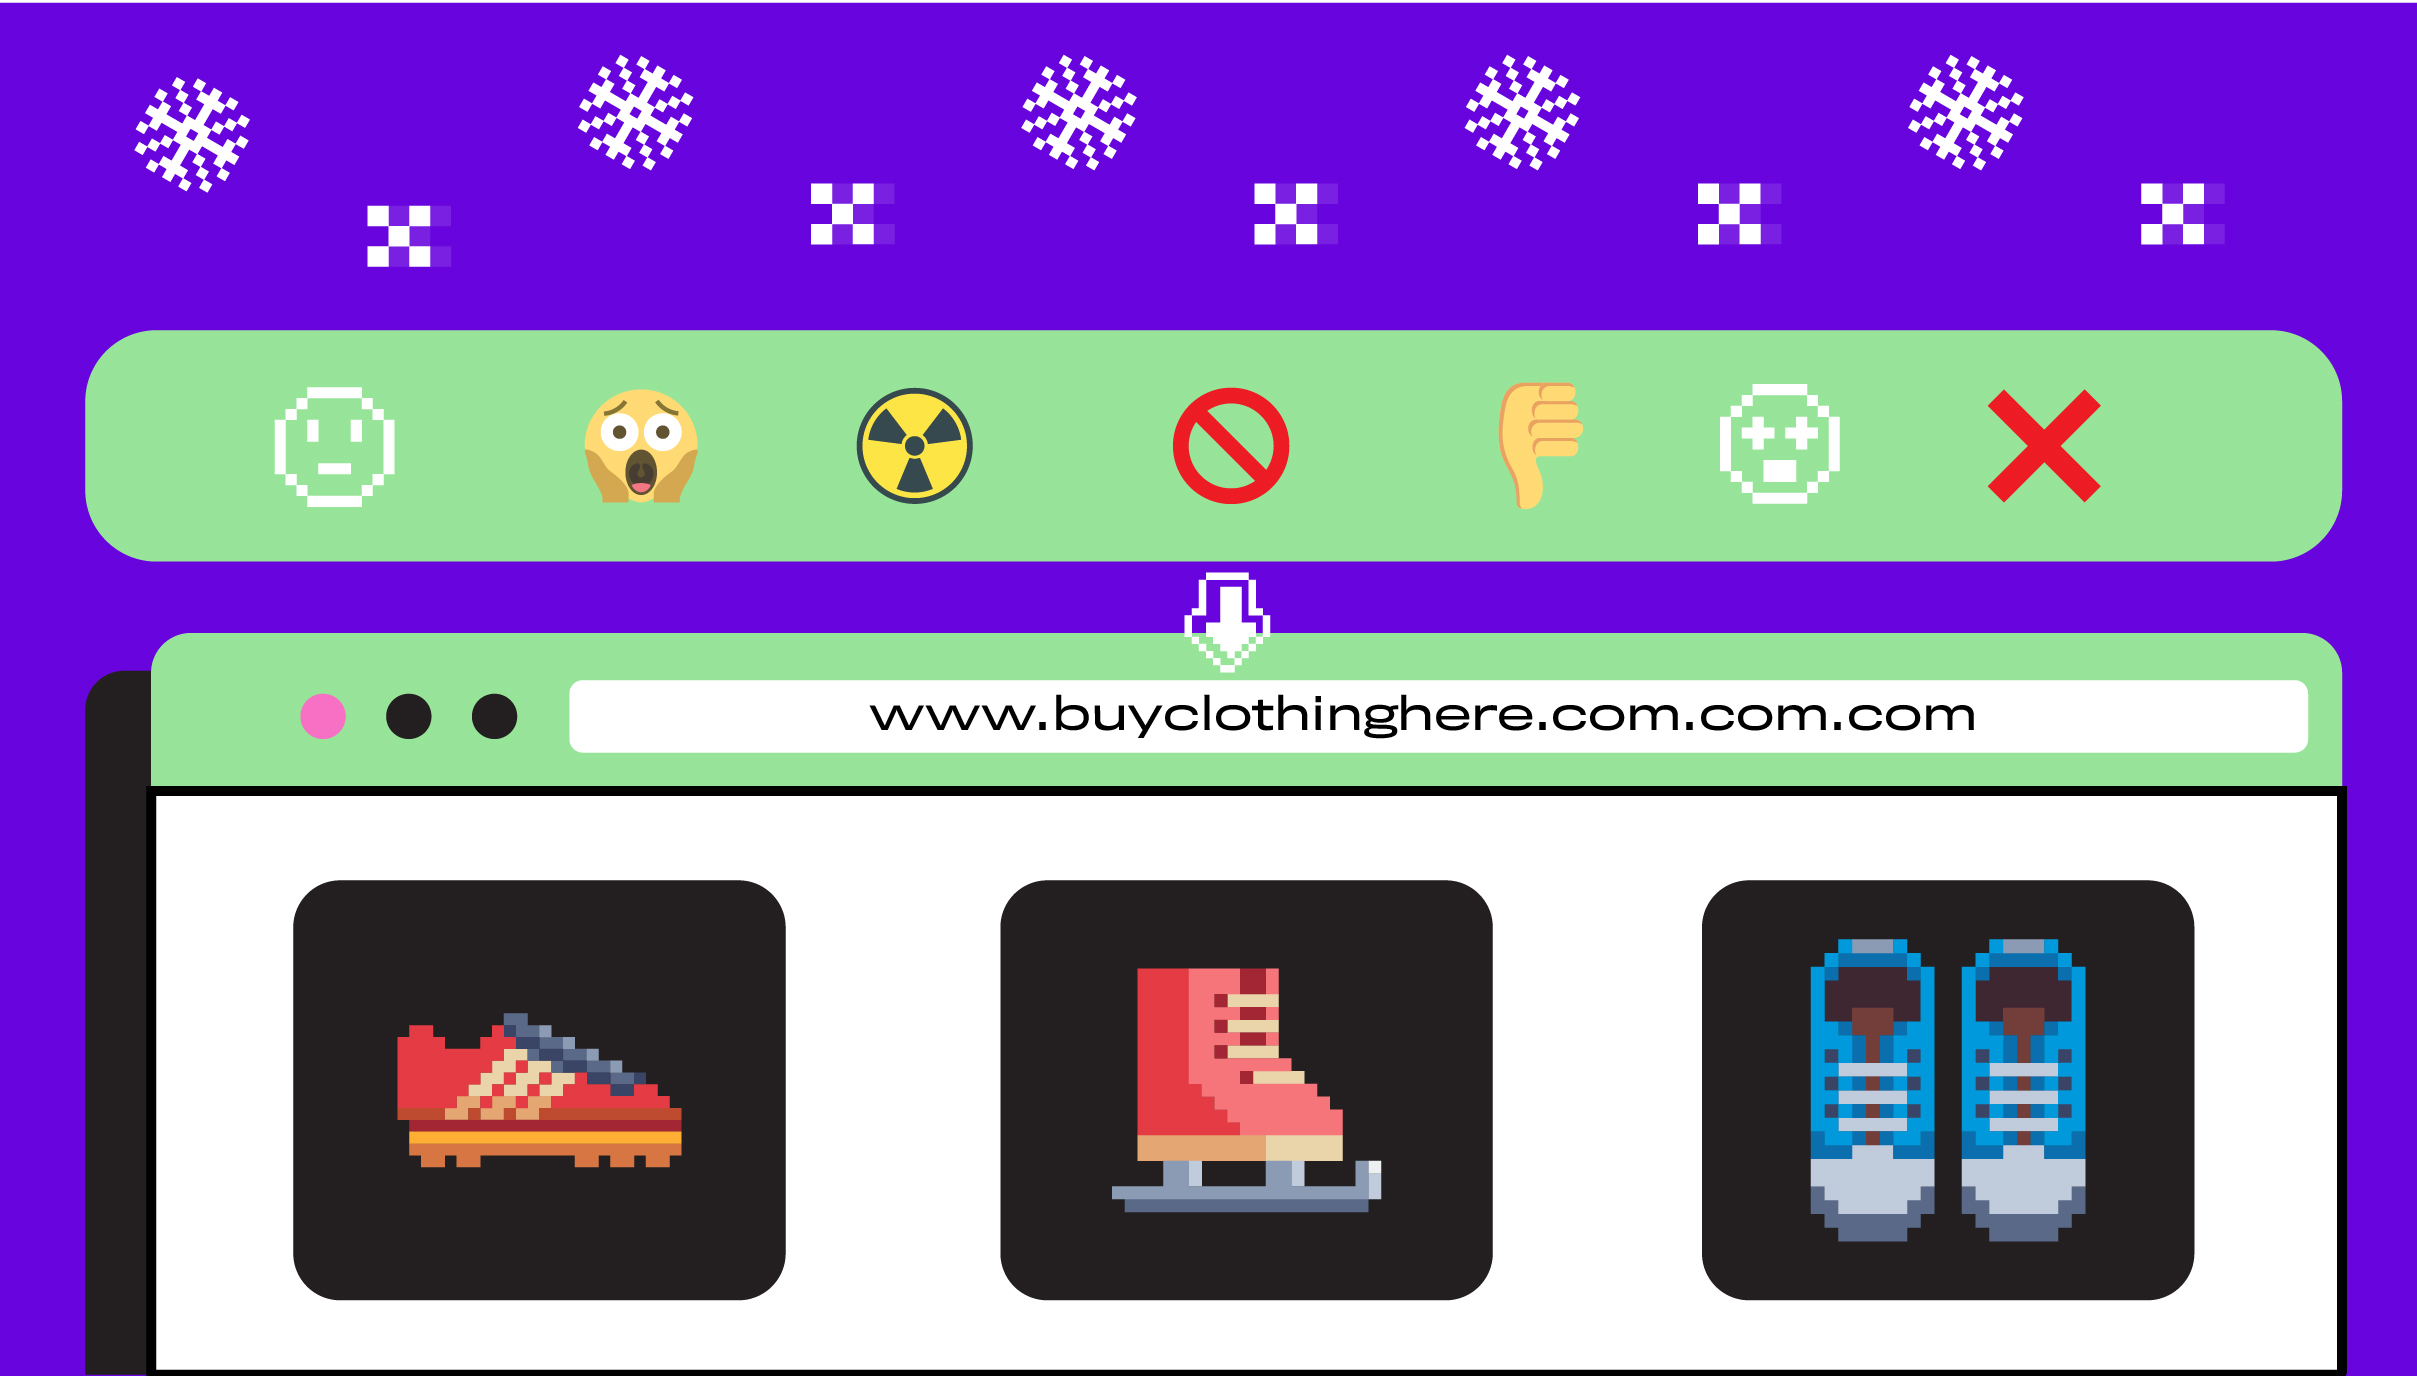 an 8-bit style online shop window with soccer cleat, skate and running shoes, unhappy and shocked emojis, hazard emoji, prohibit emoji, thumbs down emoji and red X; text: www.buyclothinghere.com.com.com